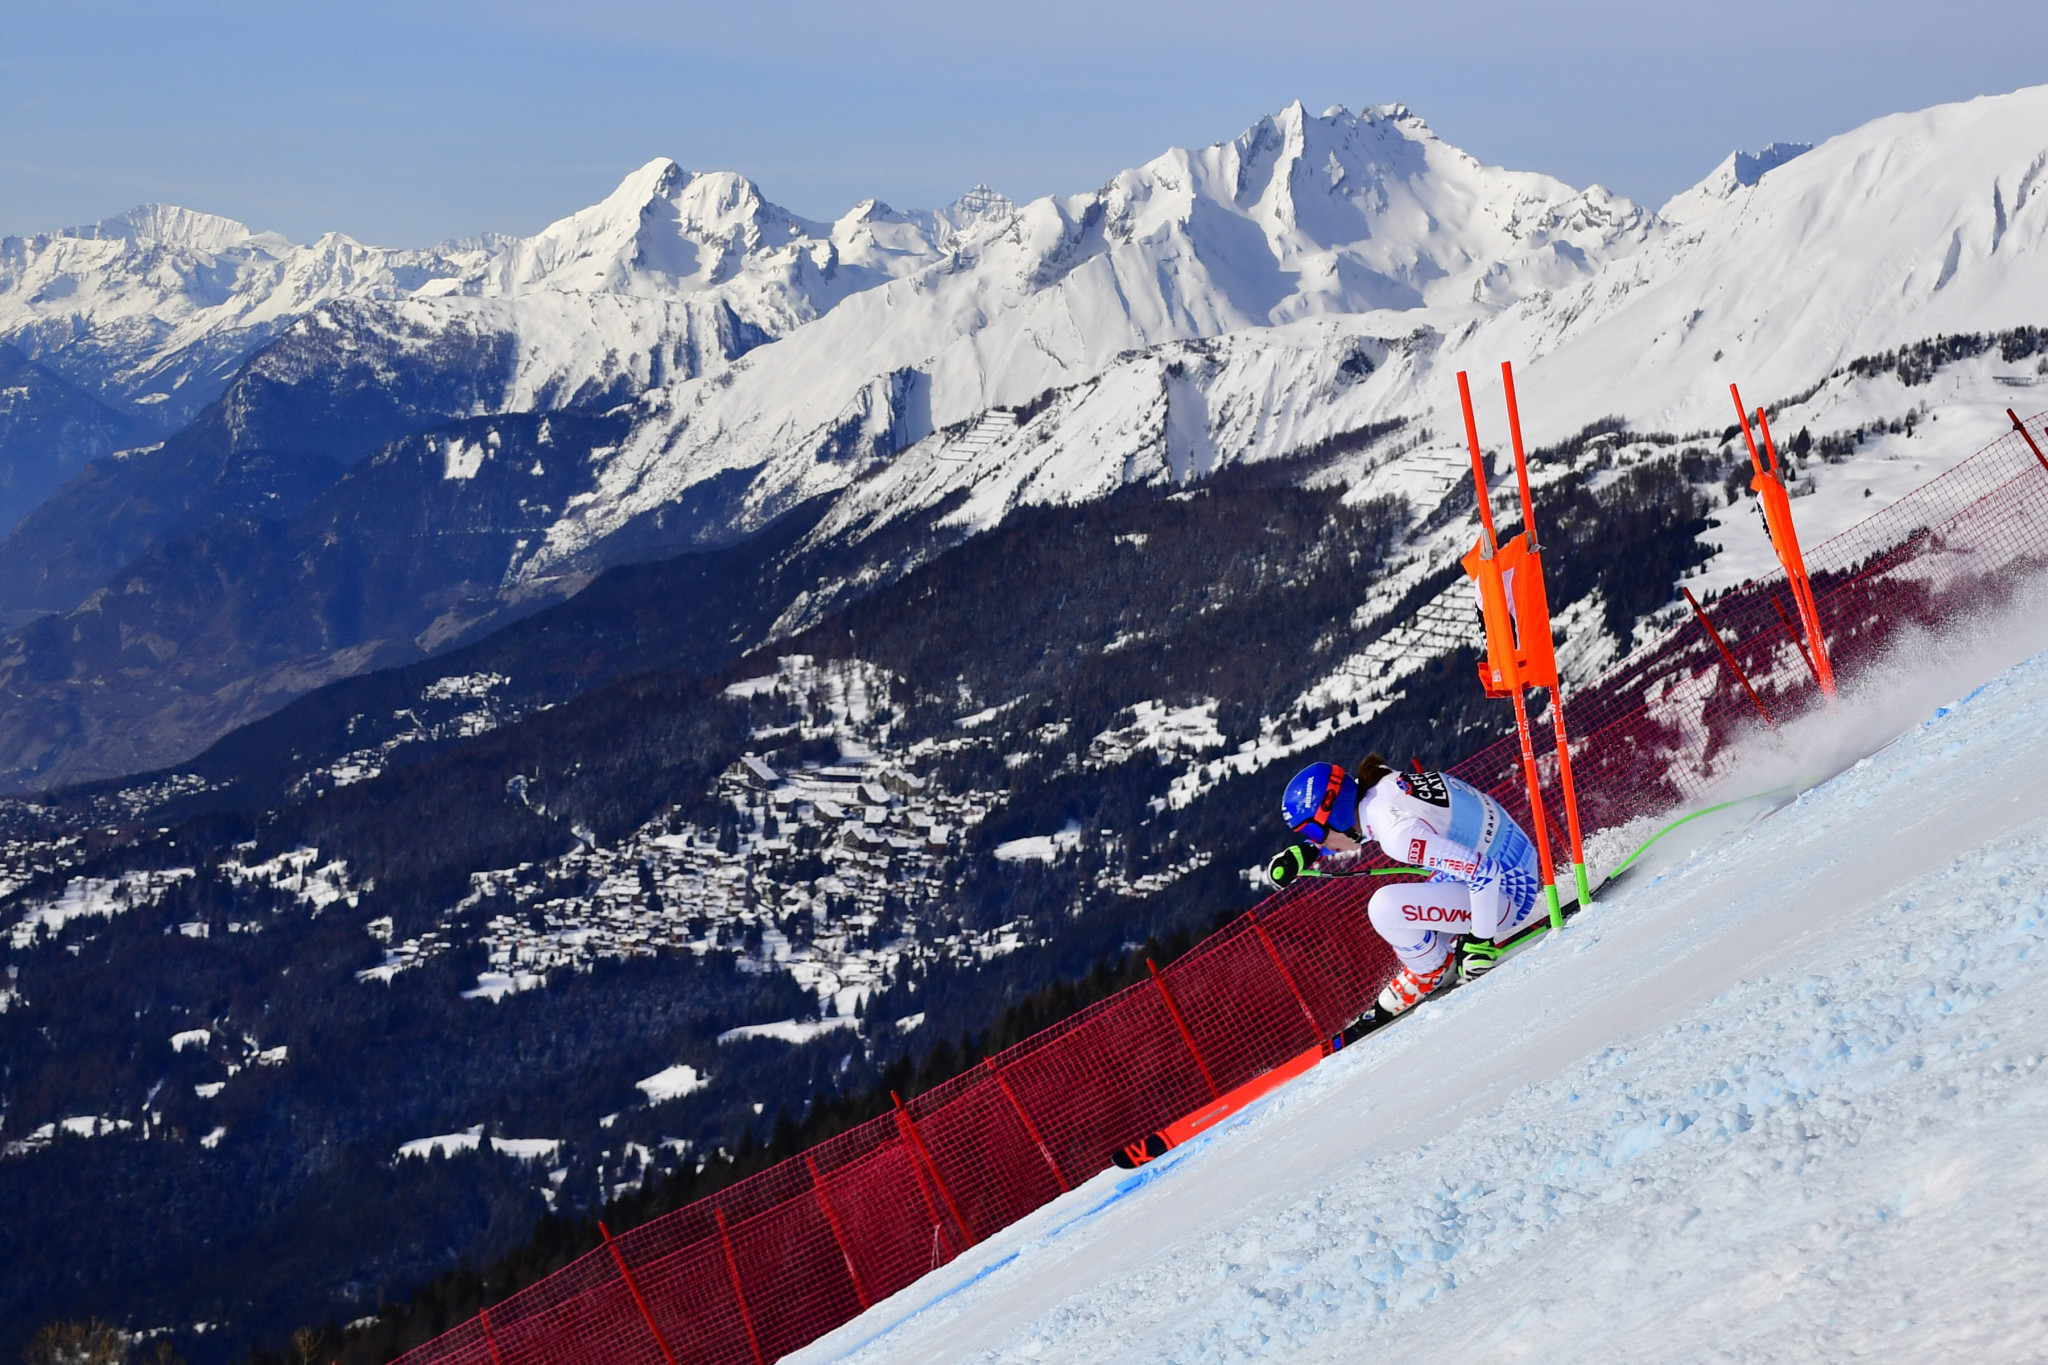 Slovakia's Petra Vlhová recorded a career-best downhill result by finishing fourth ©Getty Images